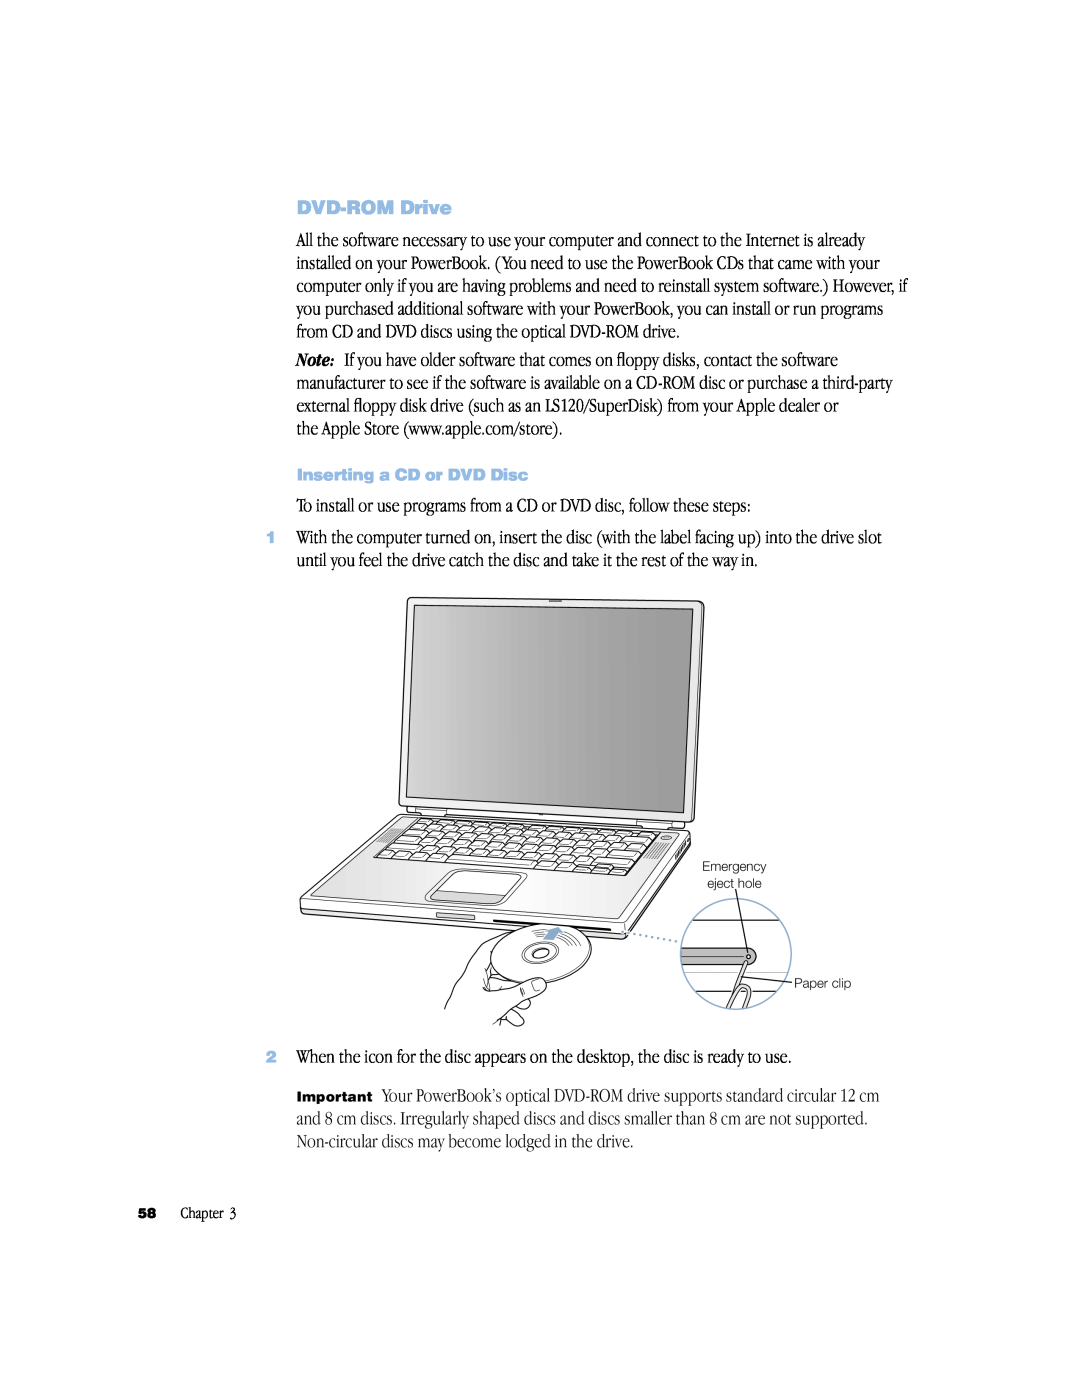 Apple powerbook g4 manual DVD-ROM Drive, To install or use programs from a CD or DVD disc, follow these steps 